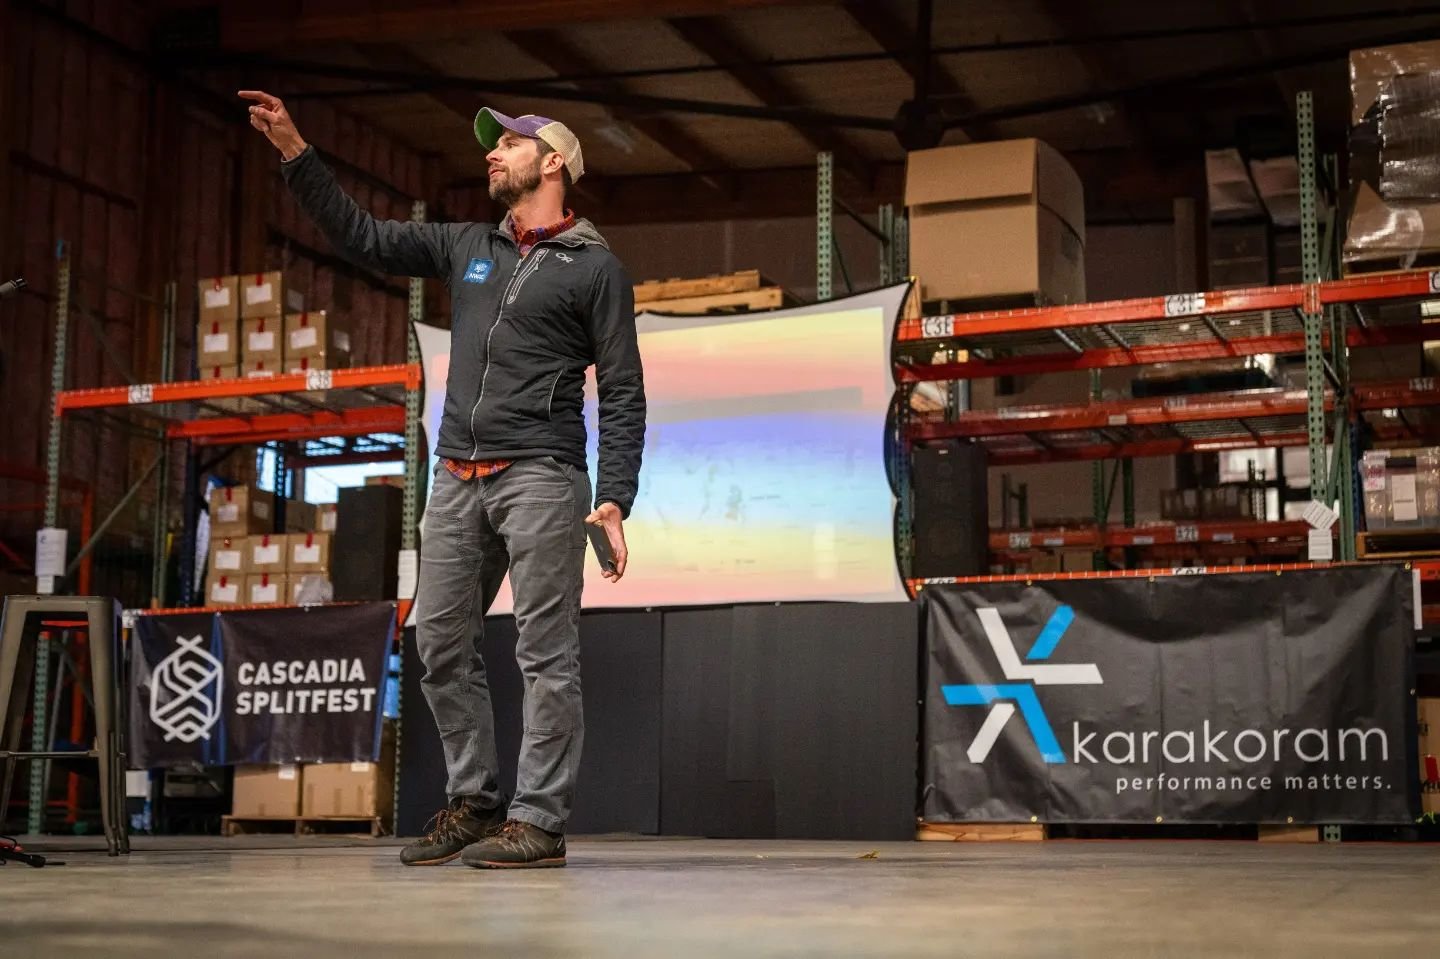 Photo recap of Friday's kickoff started at @karakorambc in North Bend with @nwacus's knowledgeable (and entertaining) deputy director @dallaswglass. We had demos, beer from the wonderful neighbors at @volitionbrewing and killer tuning with @vroomvroo